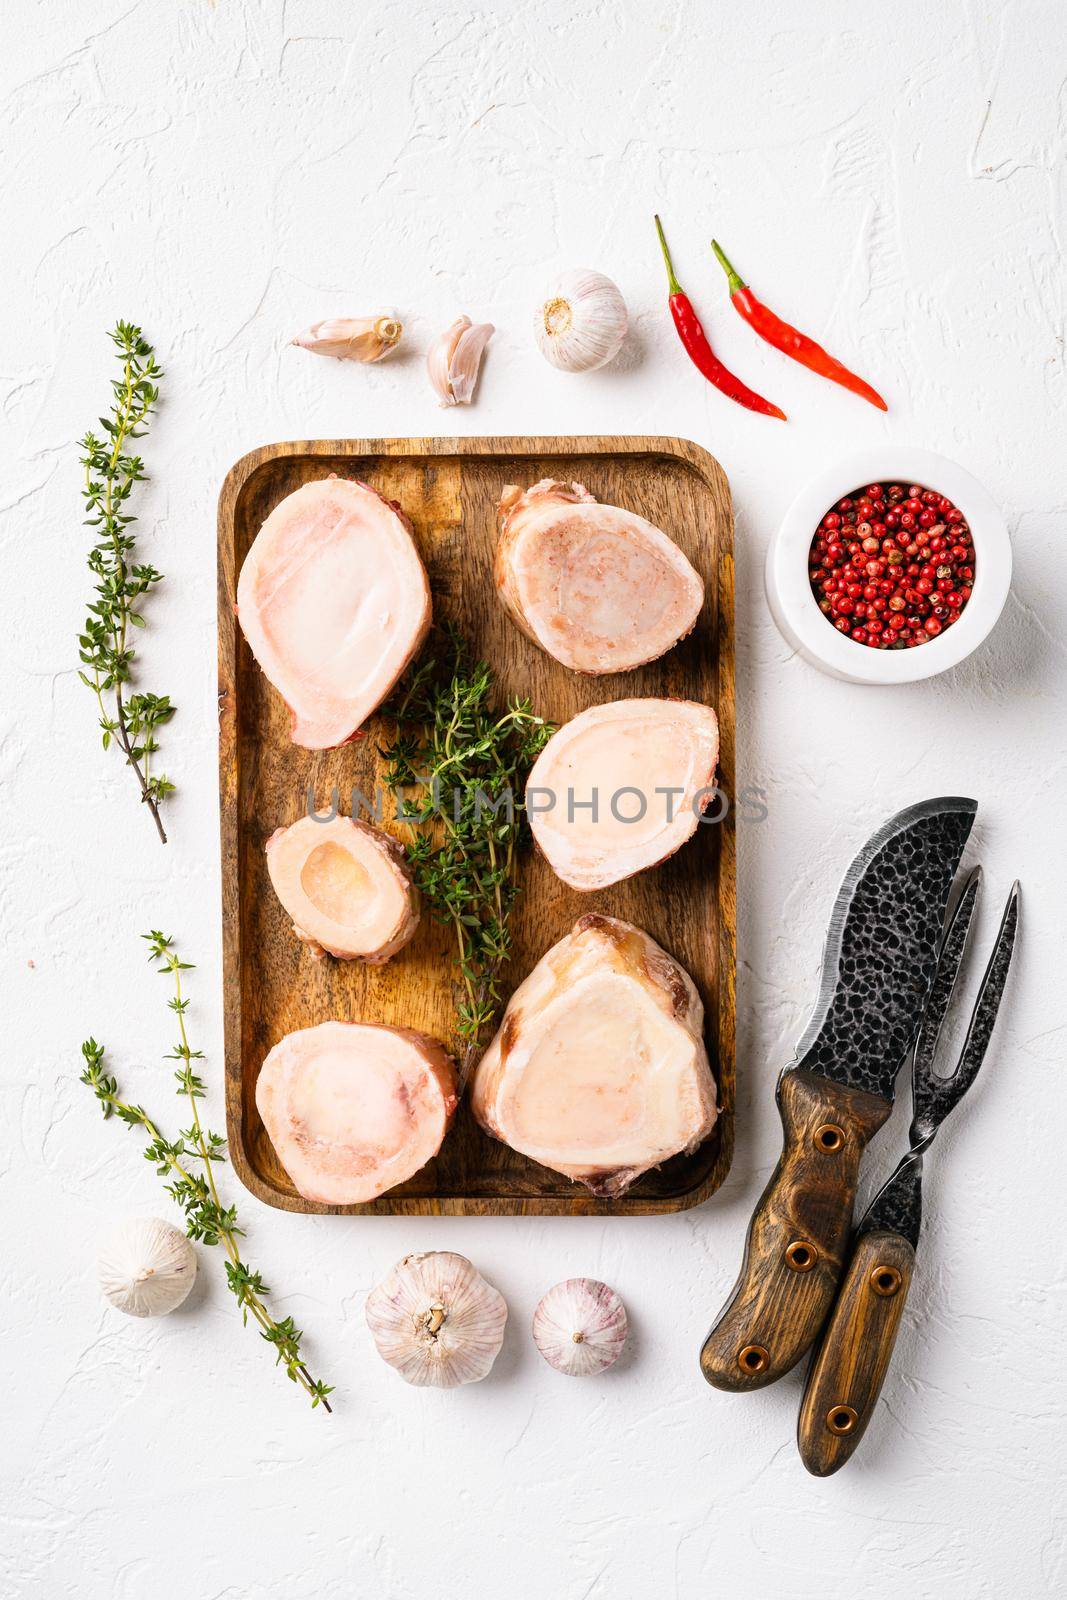 Raw bone cut veal beef, on white stone table background, top view flat lay by Ilianesolenyi